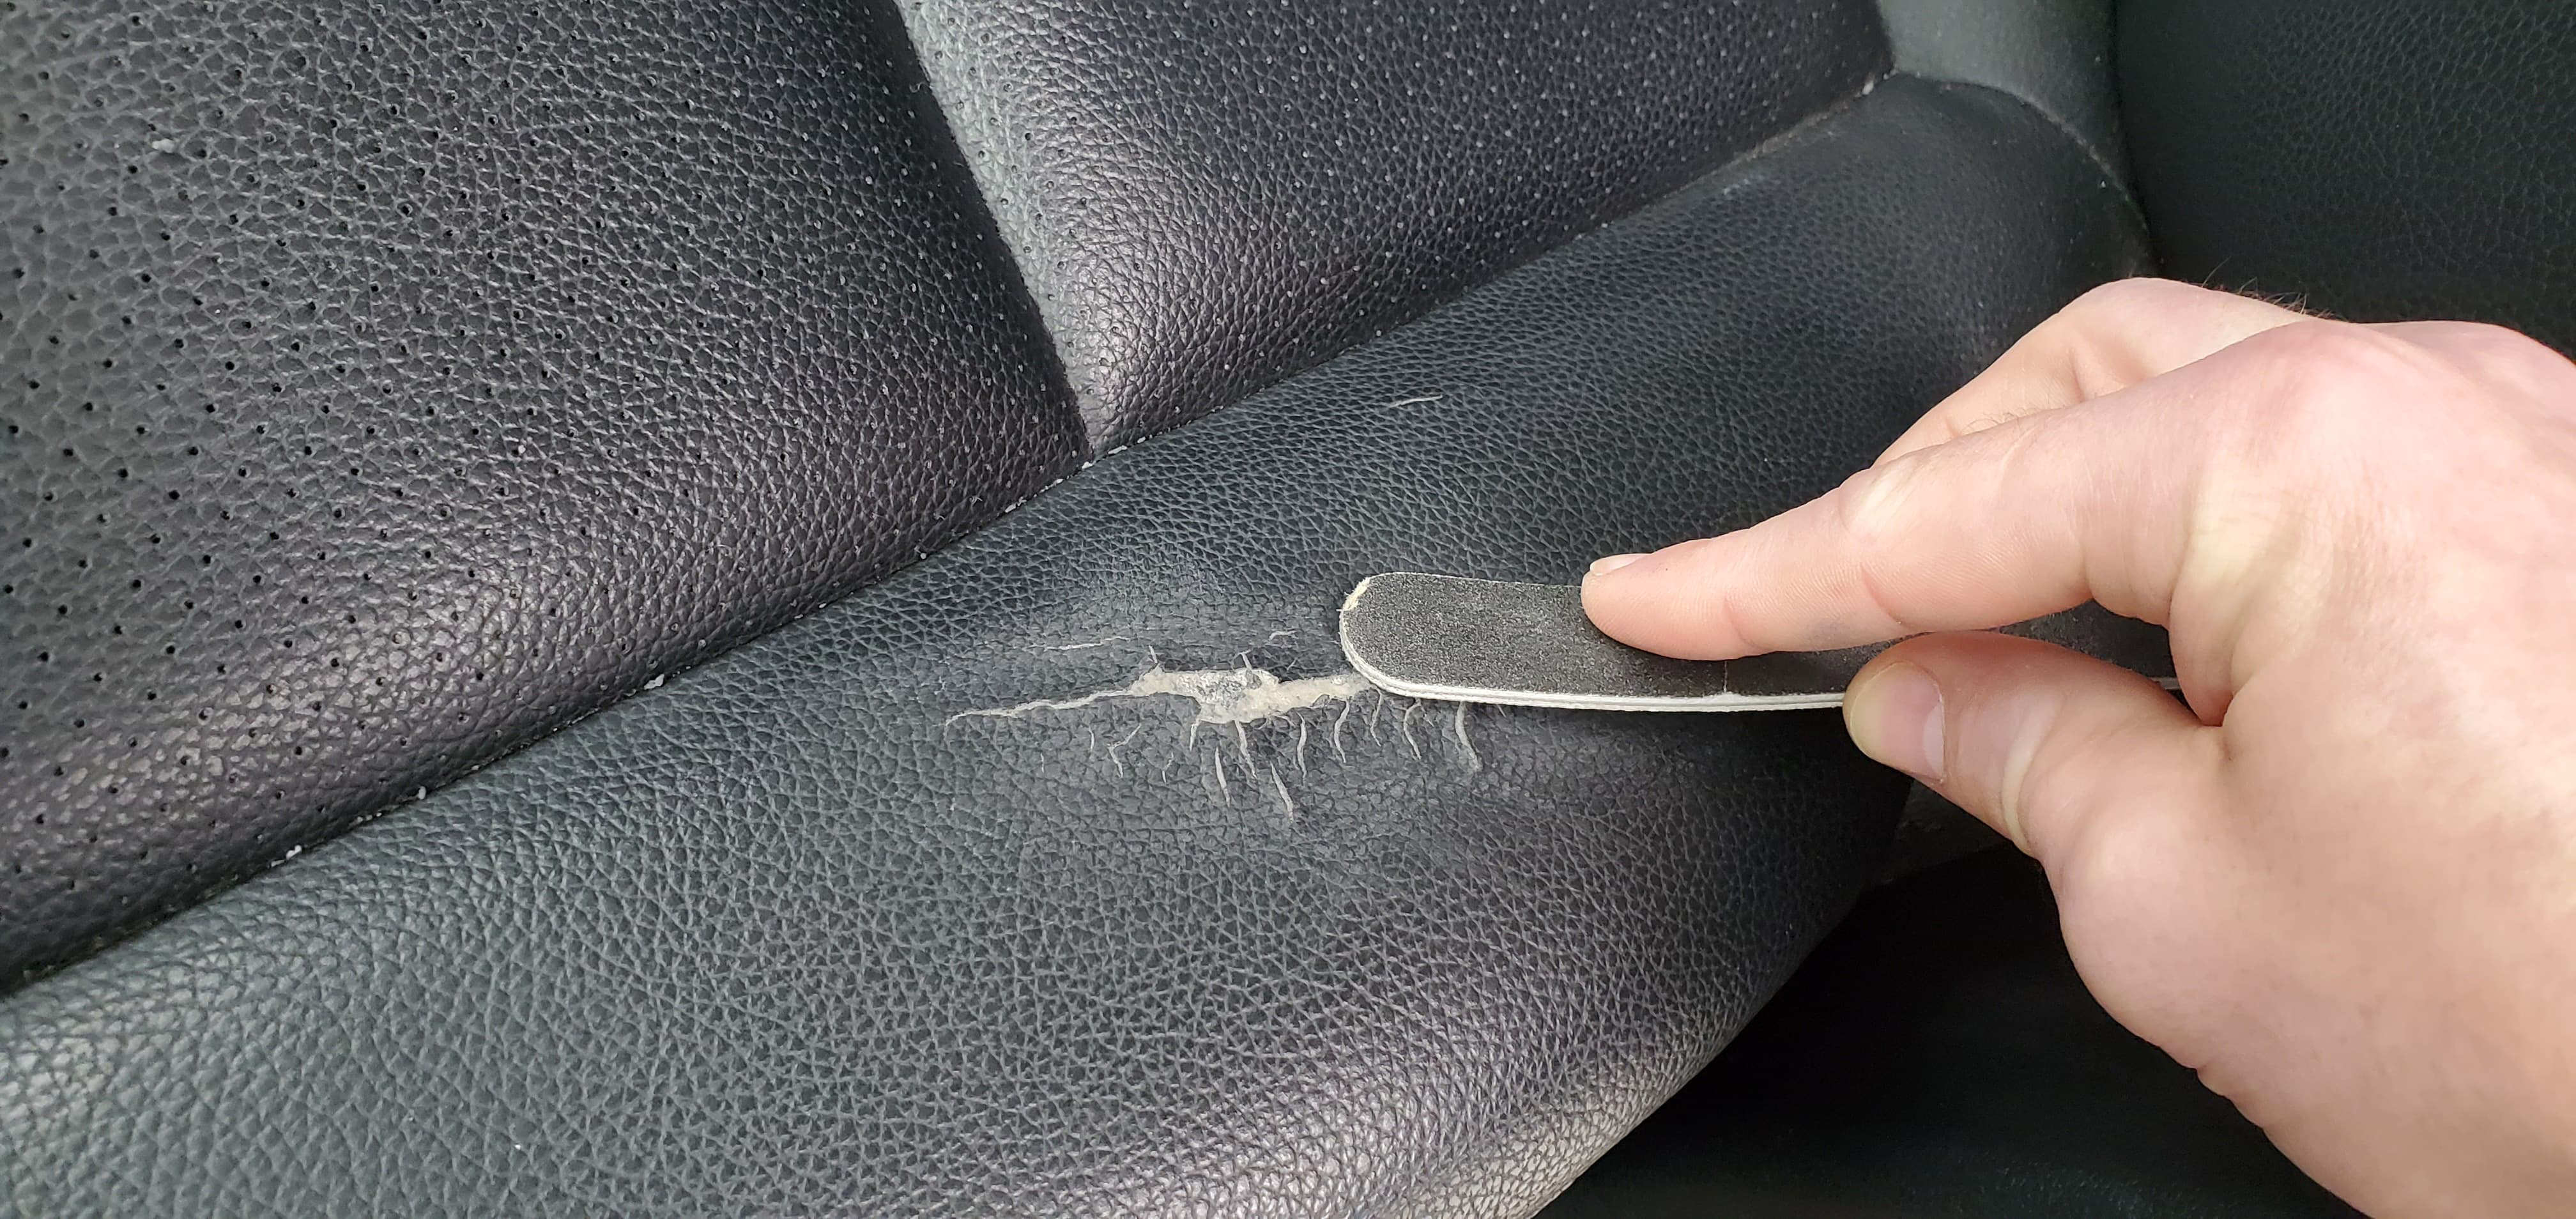 How To Repair A Leather Car Seat - How To Fix Ripped Leather Seat